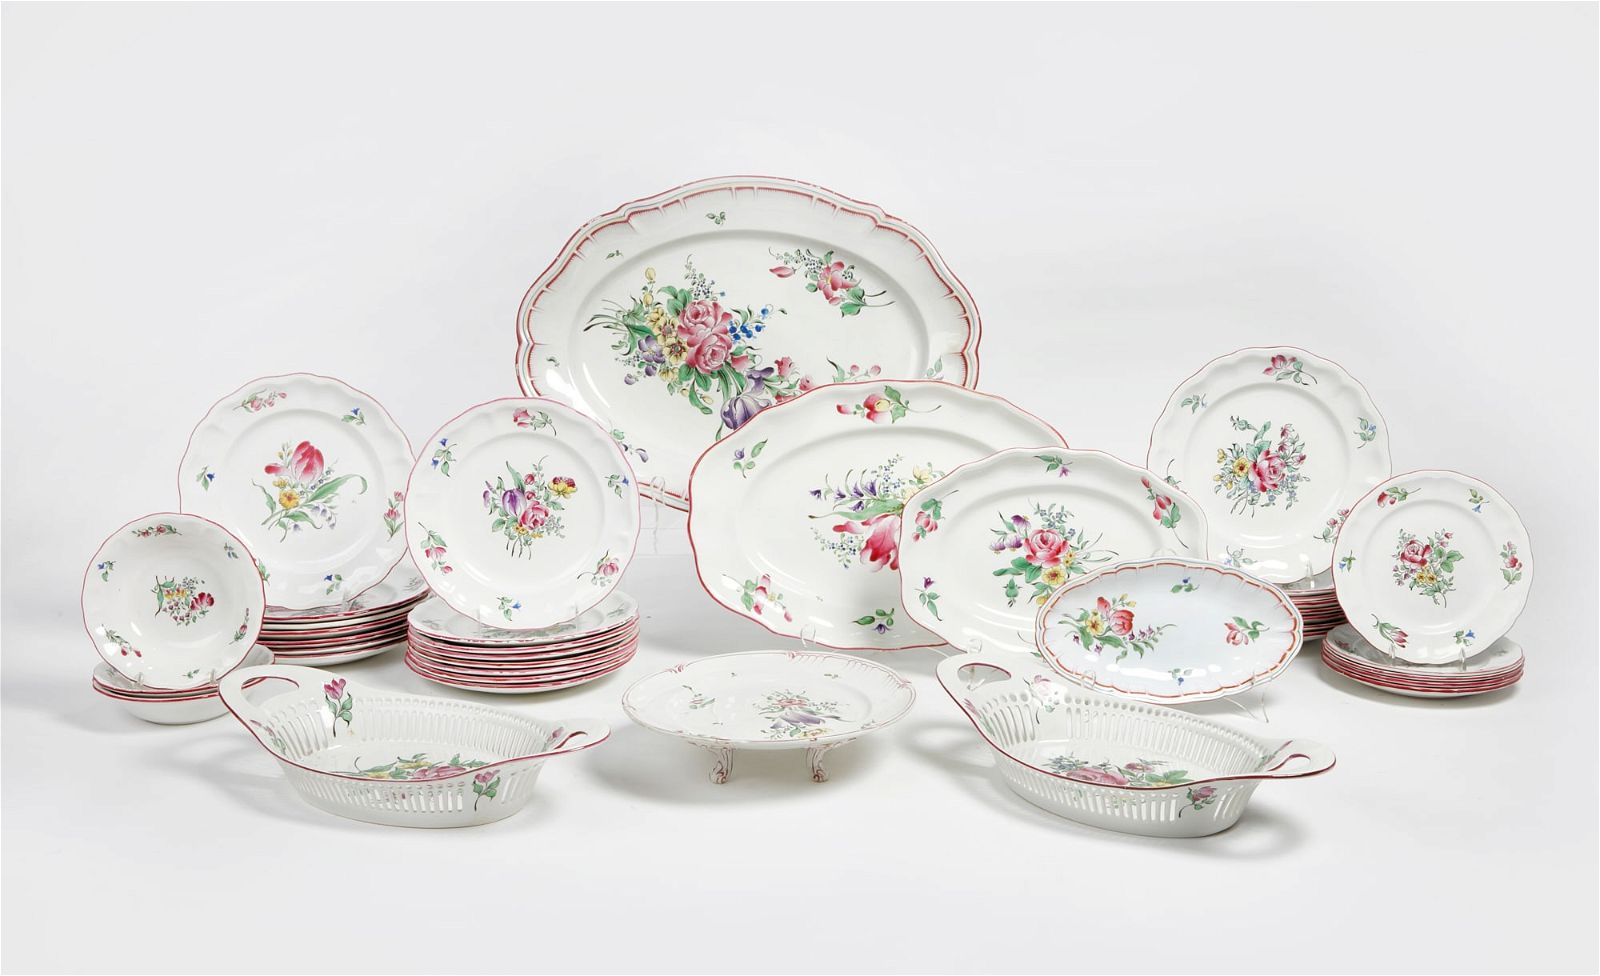 A FRENCH (LUNEVILLE) FAIENCE PART DINNER